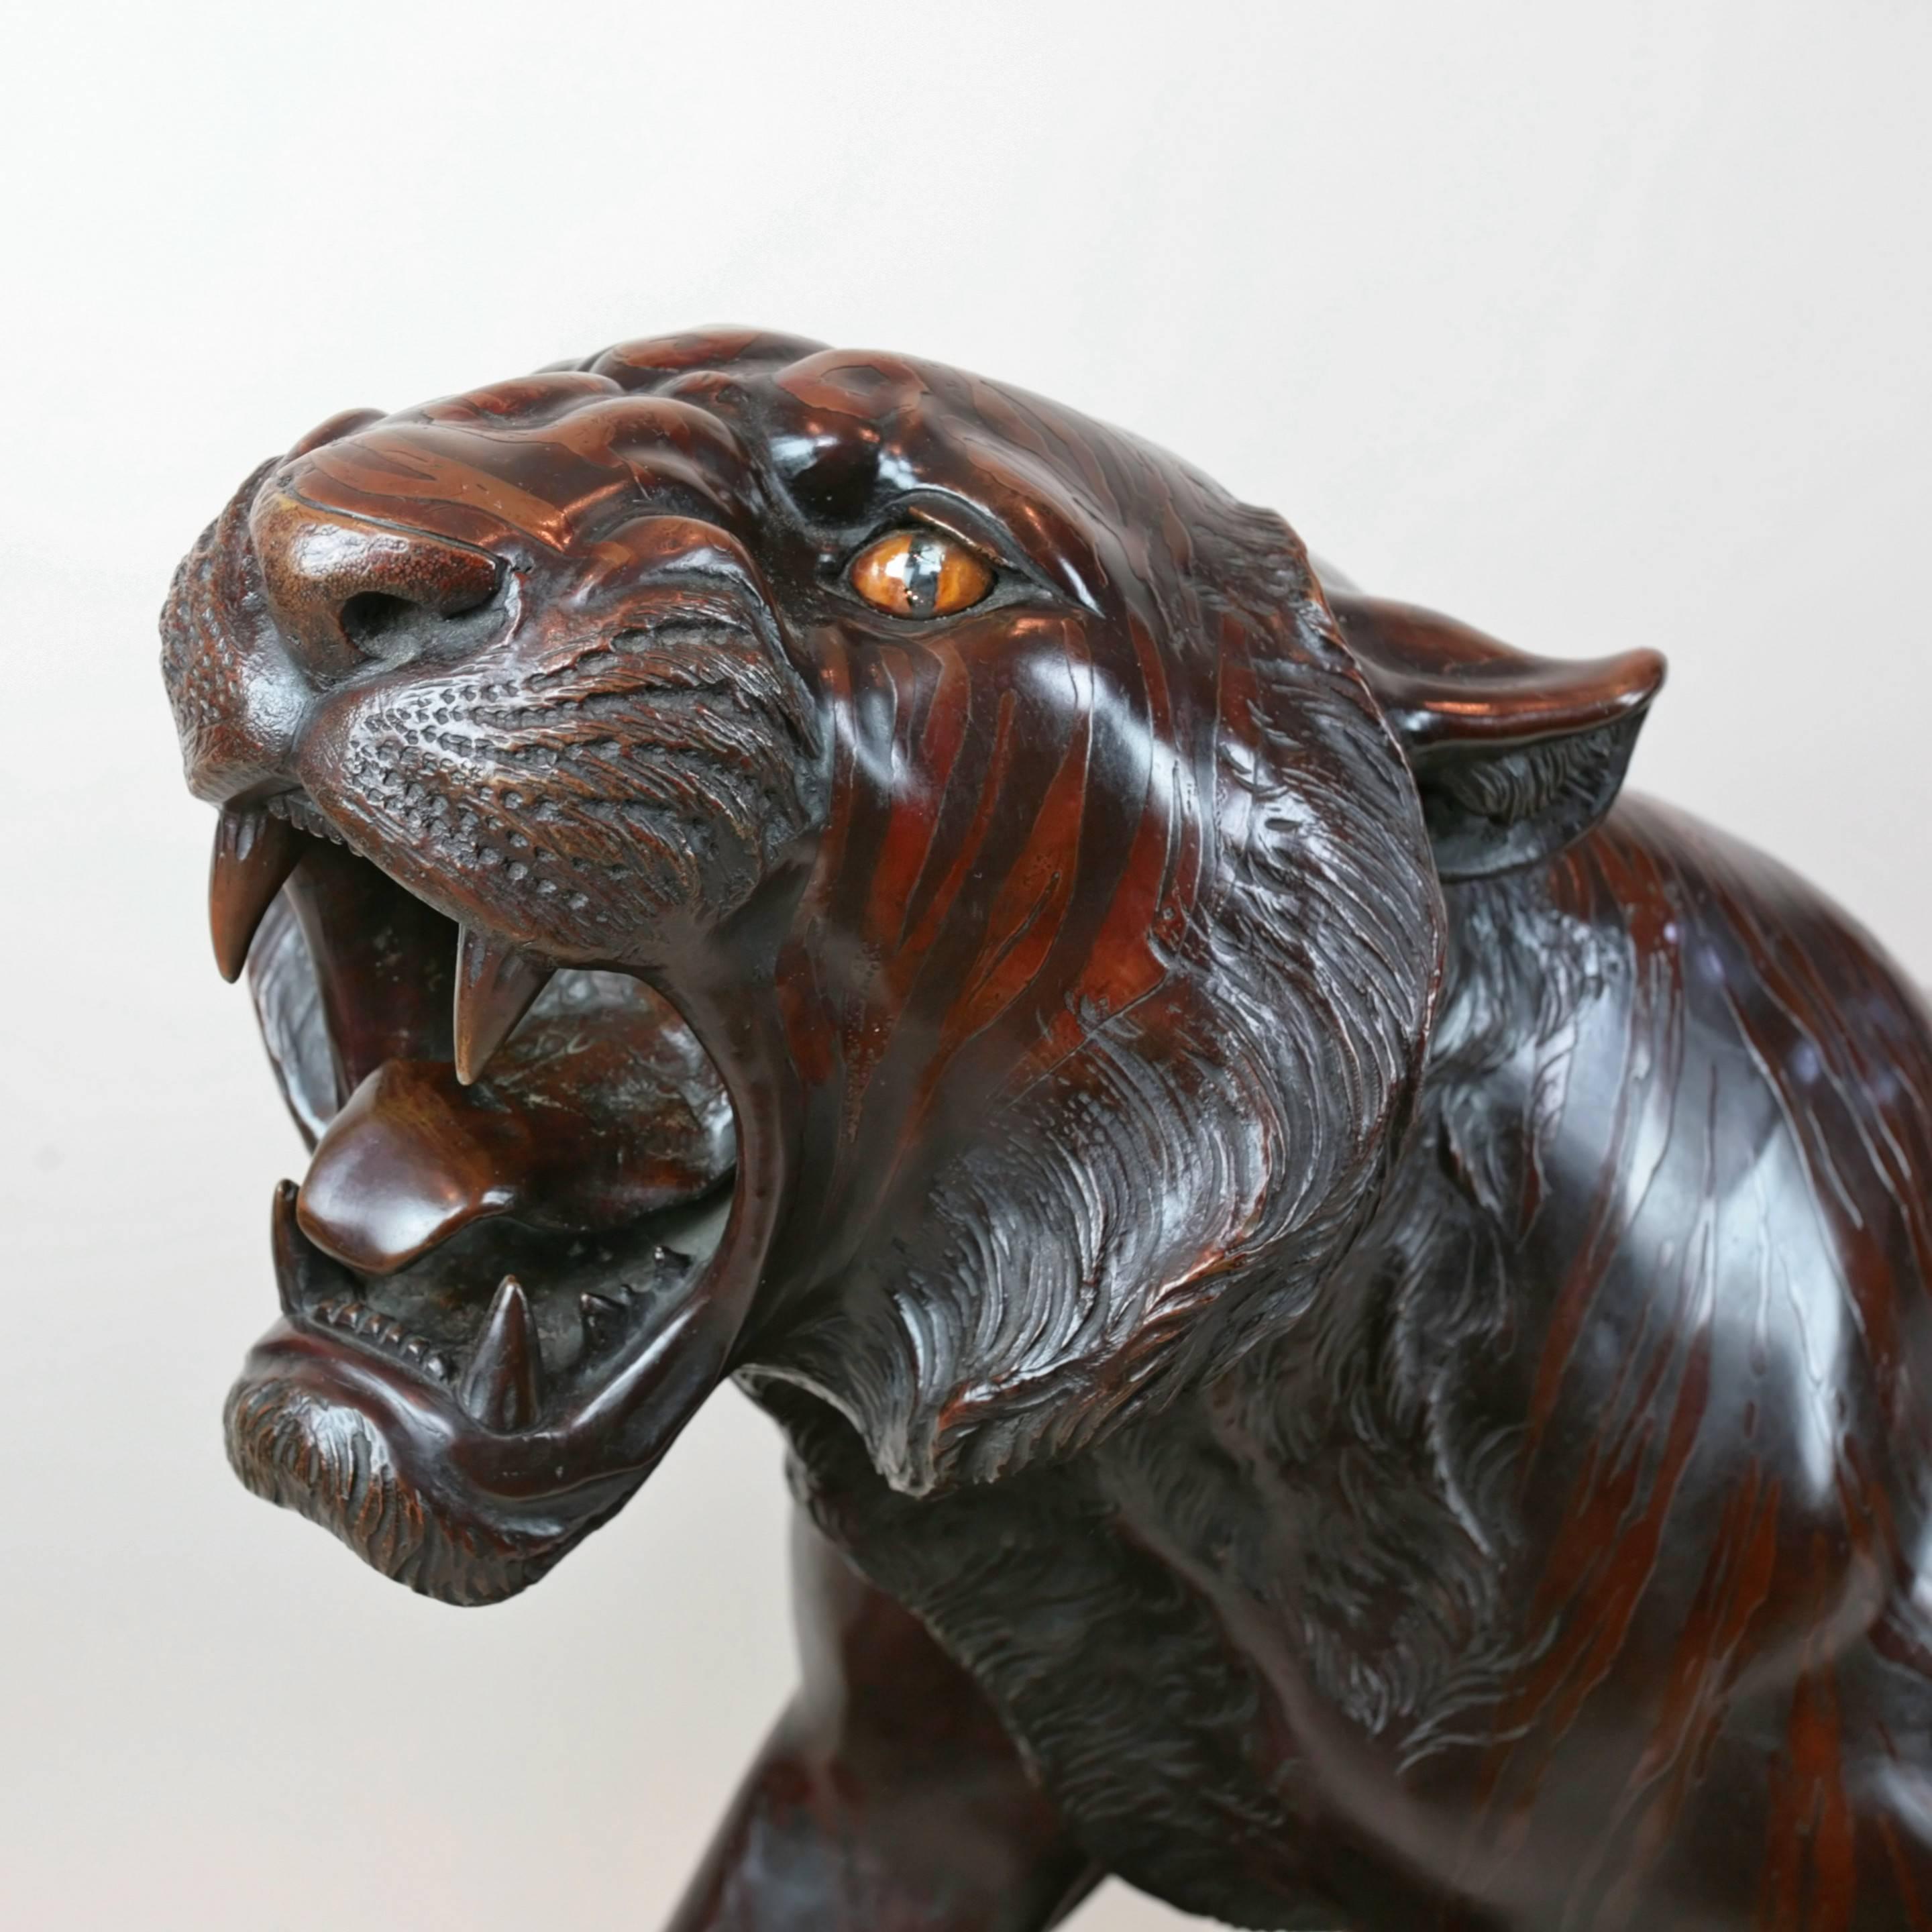 The bronze body patinated to imitate the distinctive stripes of a tiger’s skin, with inset orange glass eyes. Signed in a seal tsunematsu. On a carved hardwood base.